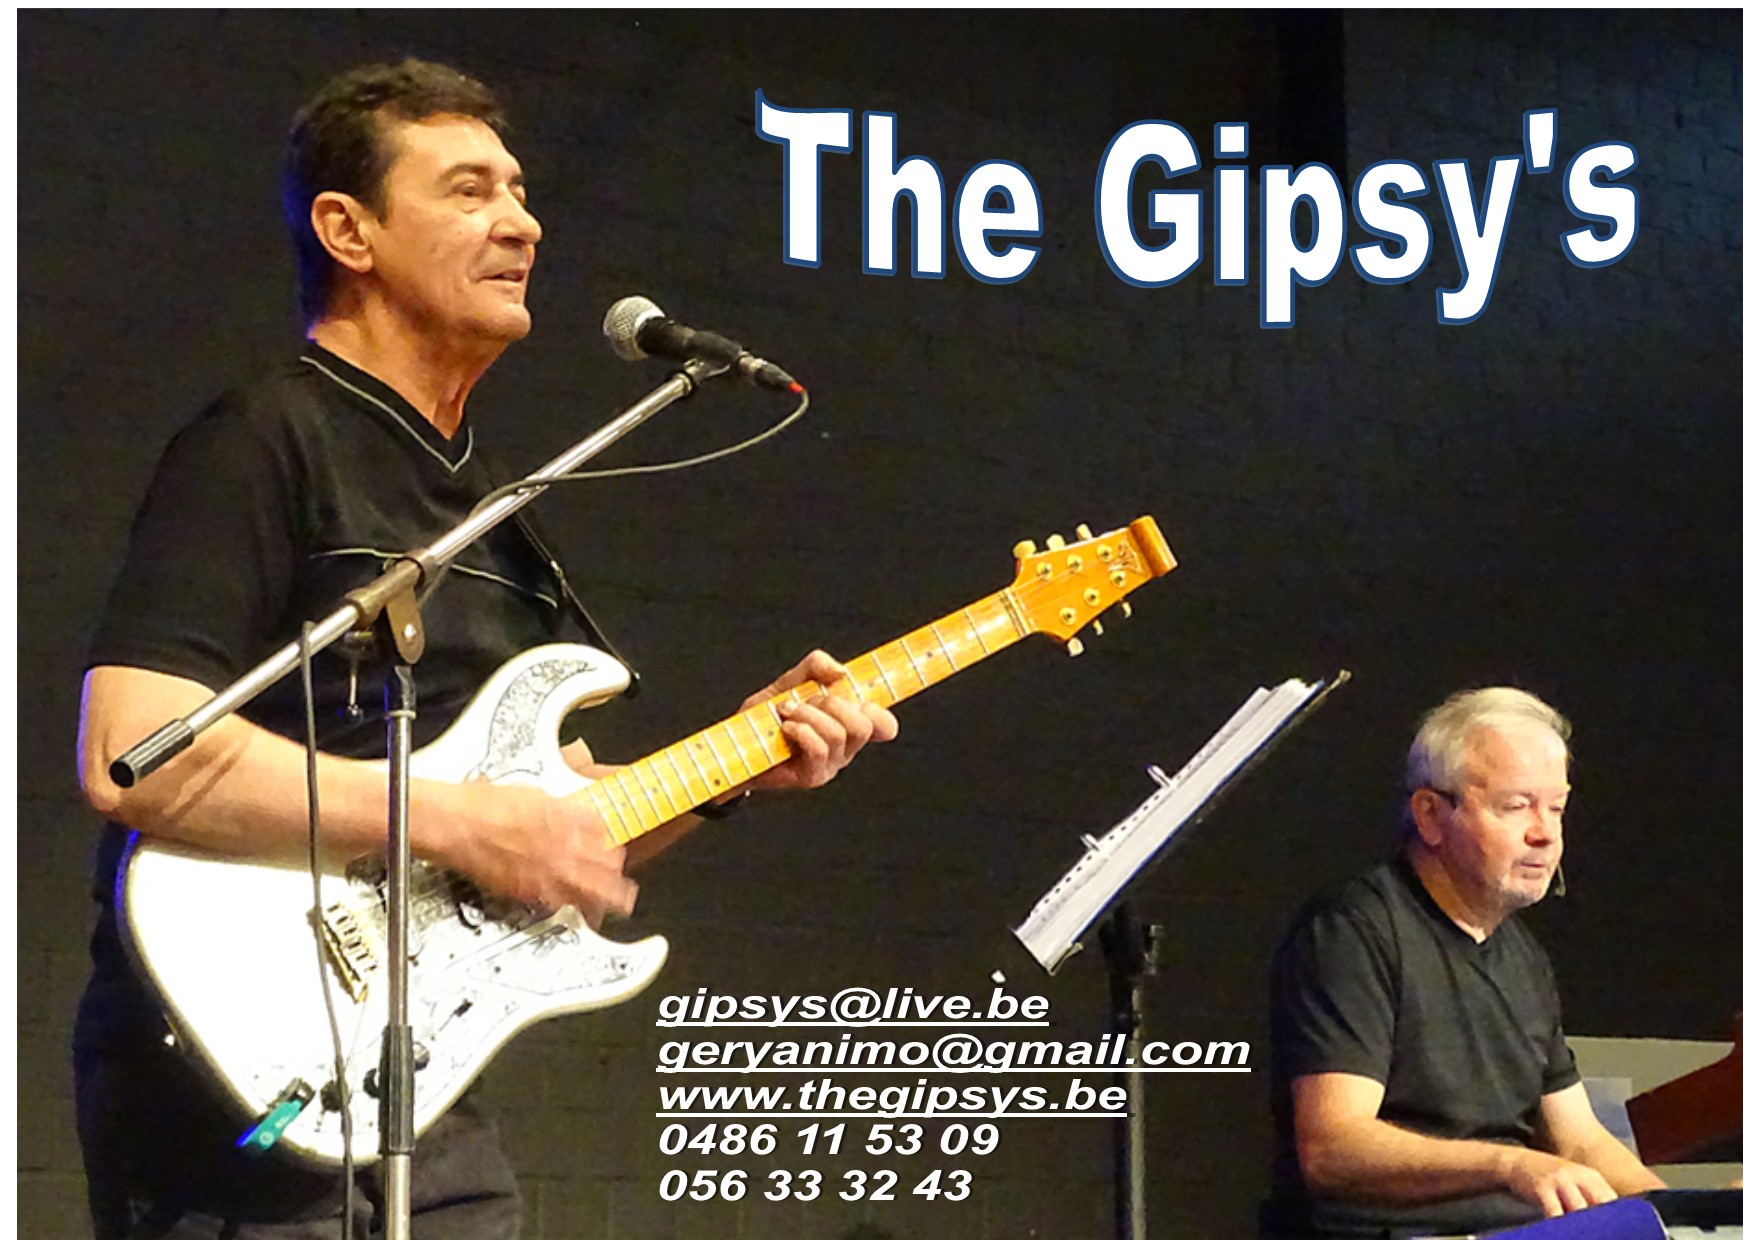 The Gipsy's